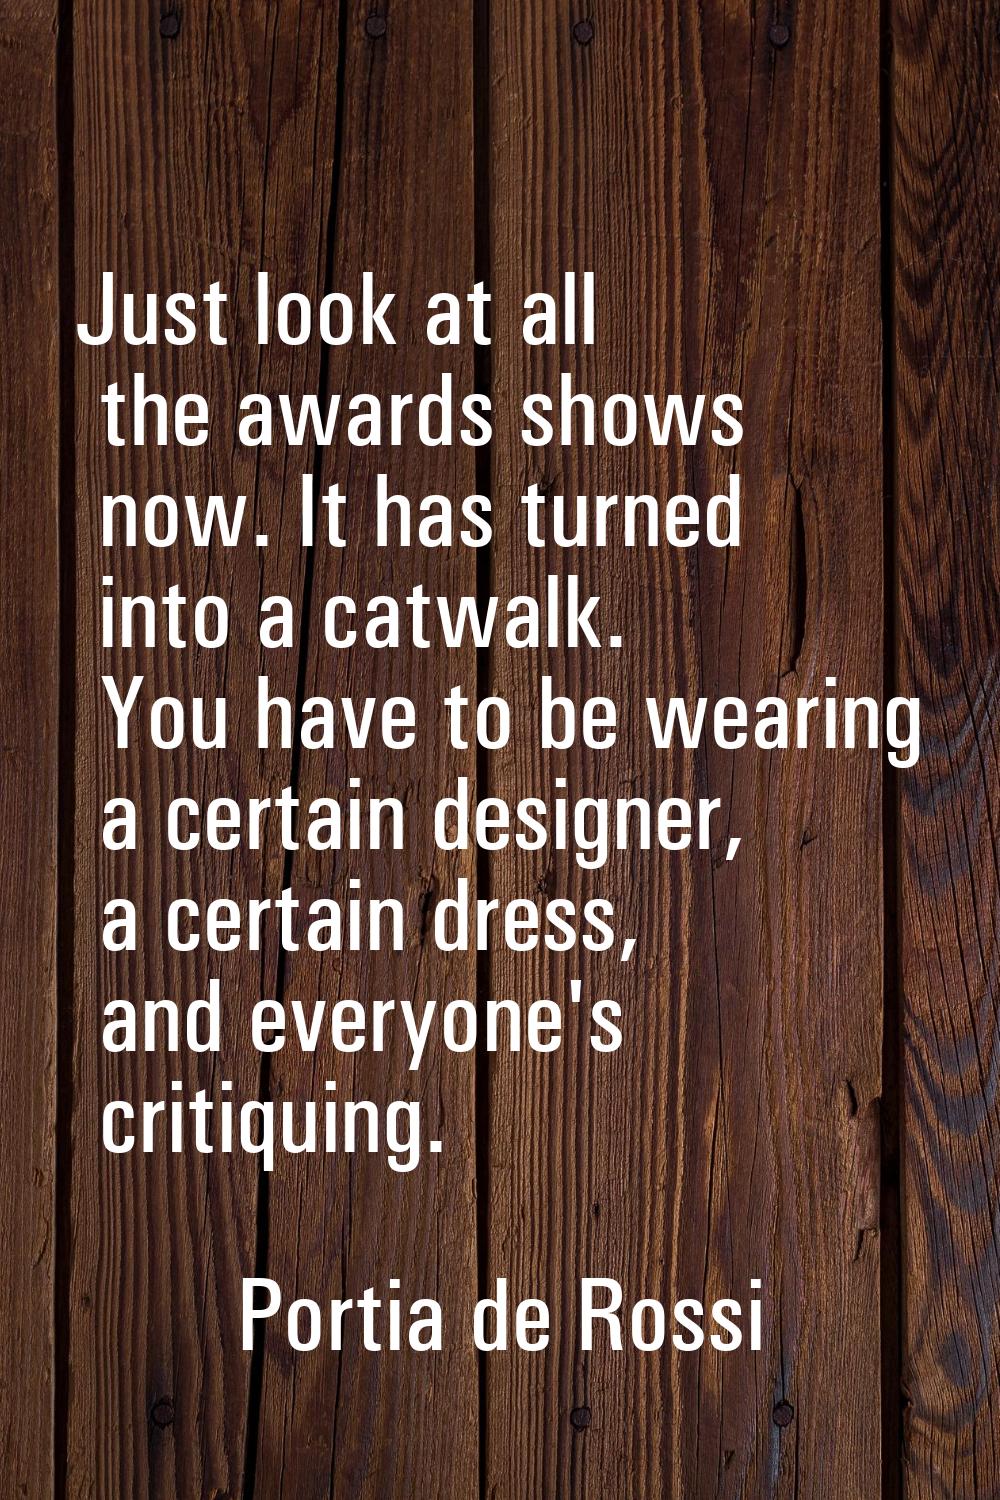 Just look at all the awards shows now. It has turned into a catwalk. You have to be wearing a certa